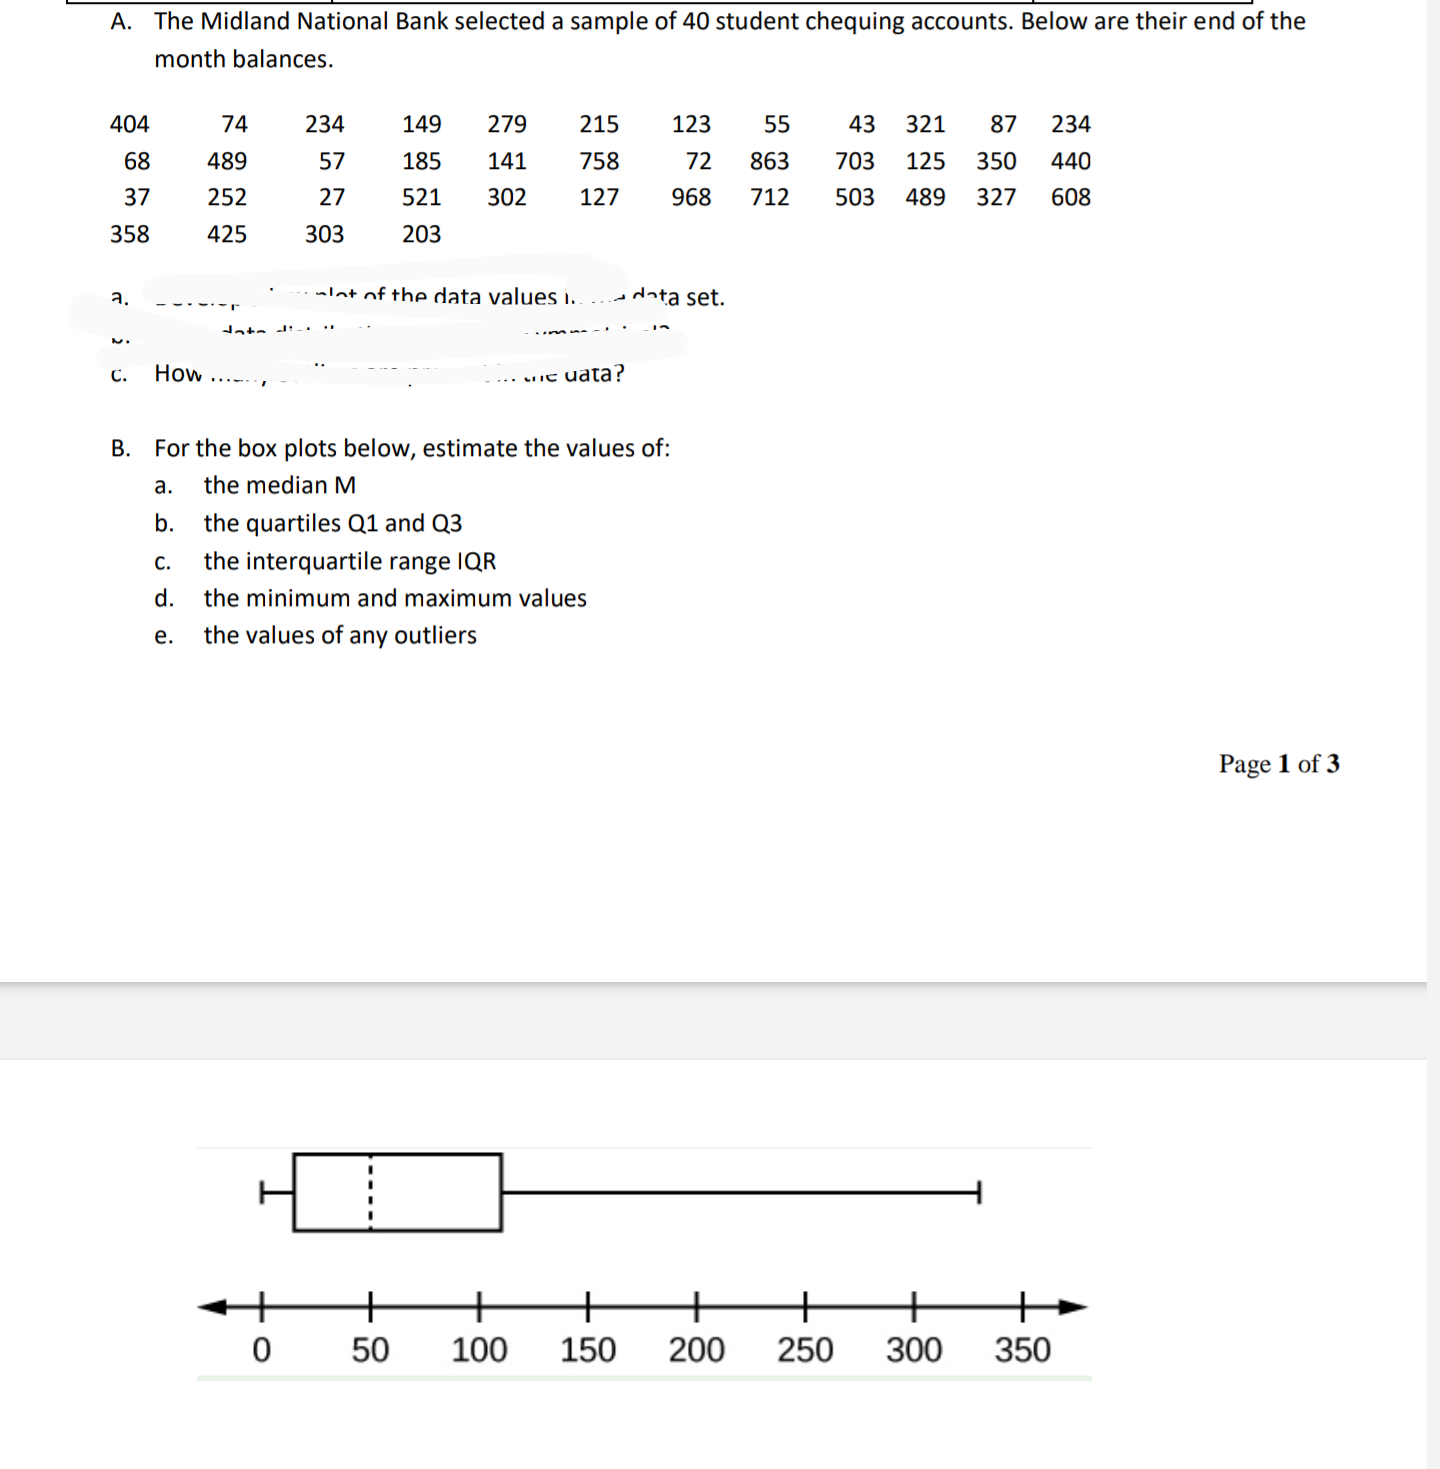 B. For the box plots below, estimate the values of:
а.
the median M
b.
the quartiles Q1 and Q3
С.
the interquartile range IQR
d.
the minimum and maximum values
е.
the values of any outliers
